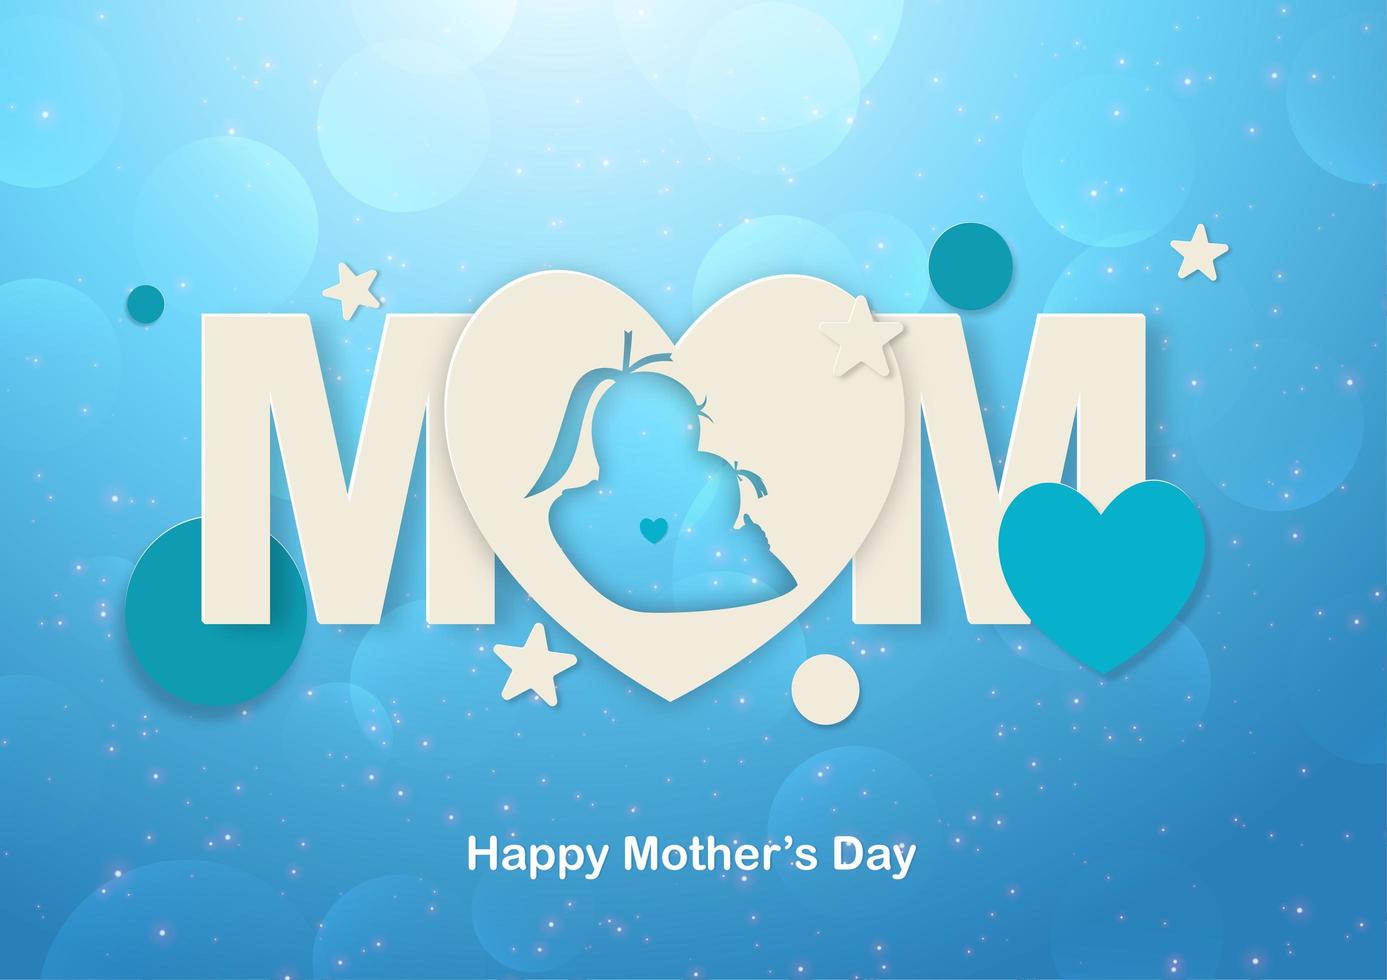 Happy mother's day Mom and shapes paper art design vector